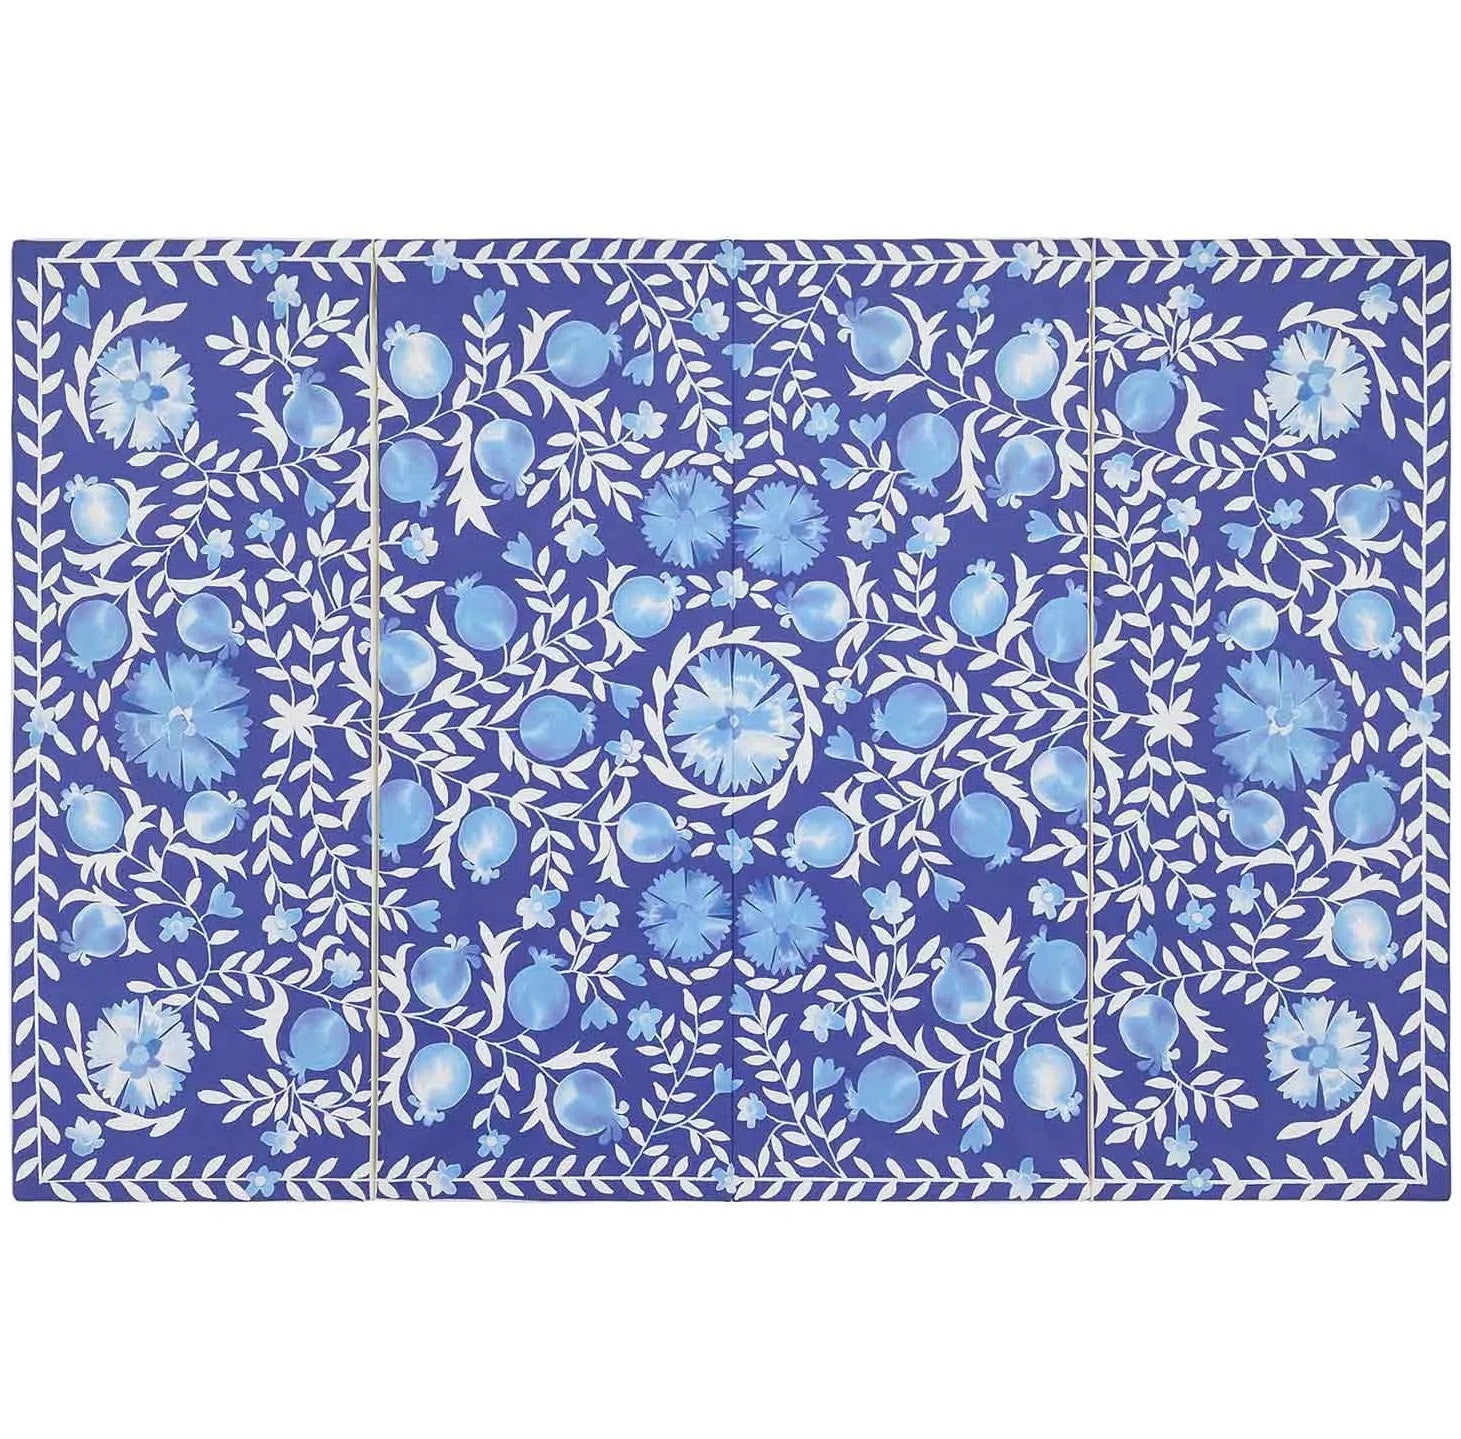 Deep sea blue and white floral tumbling mat